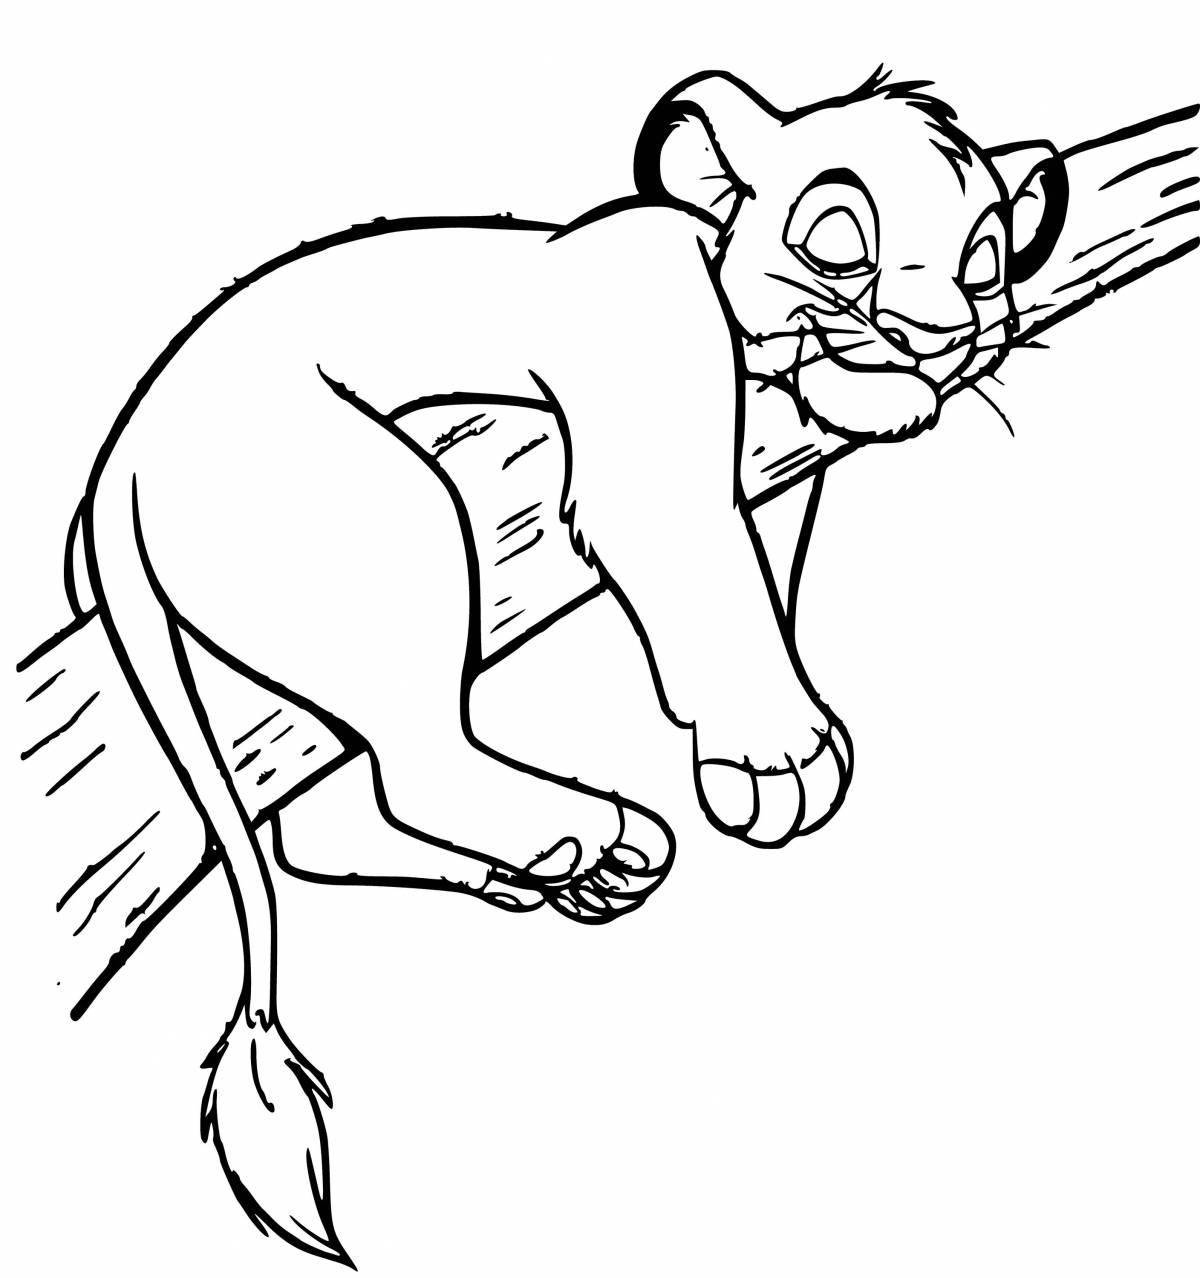 Simba the cat's playful coloring page